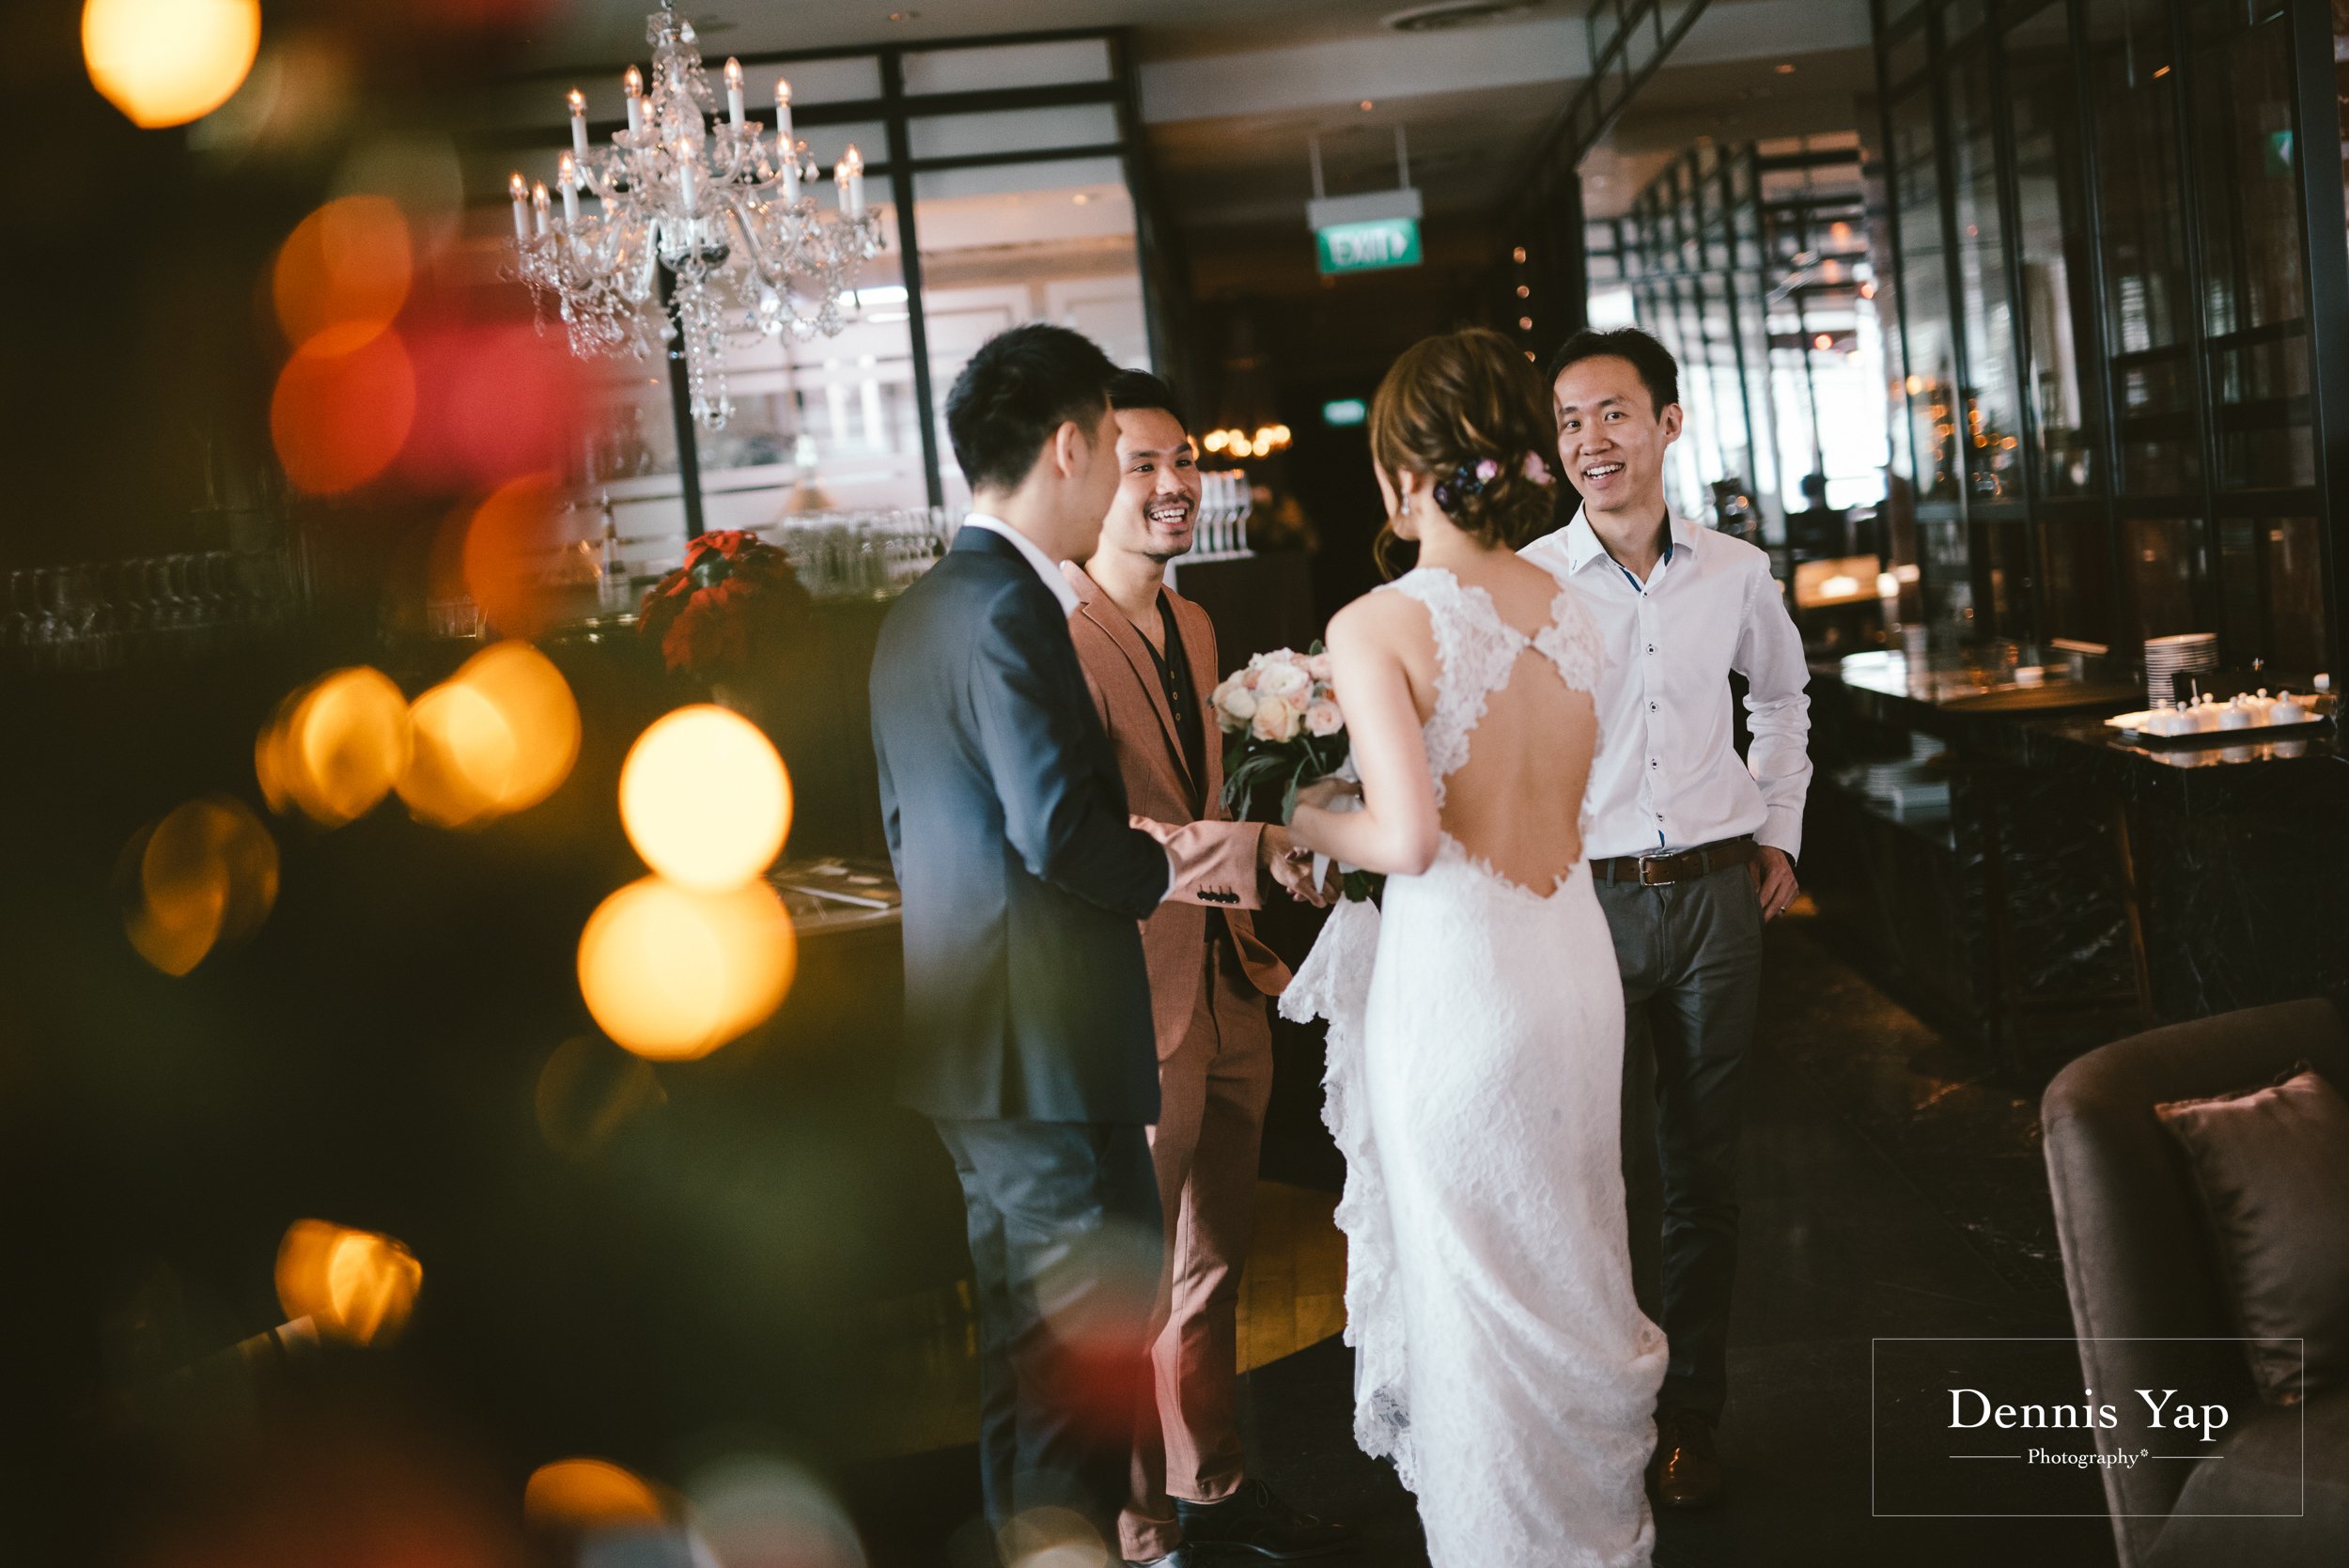 clarence kerlyn registration of marriage in zafferano singapore dennis yap photography malaysia top wedding photographer-4.jpg